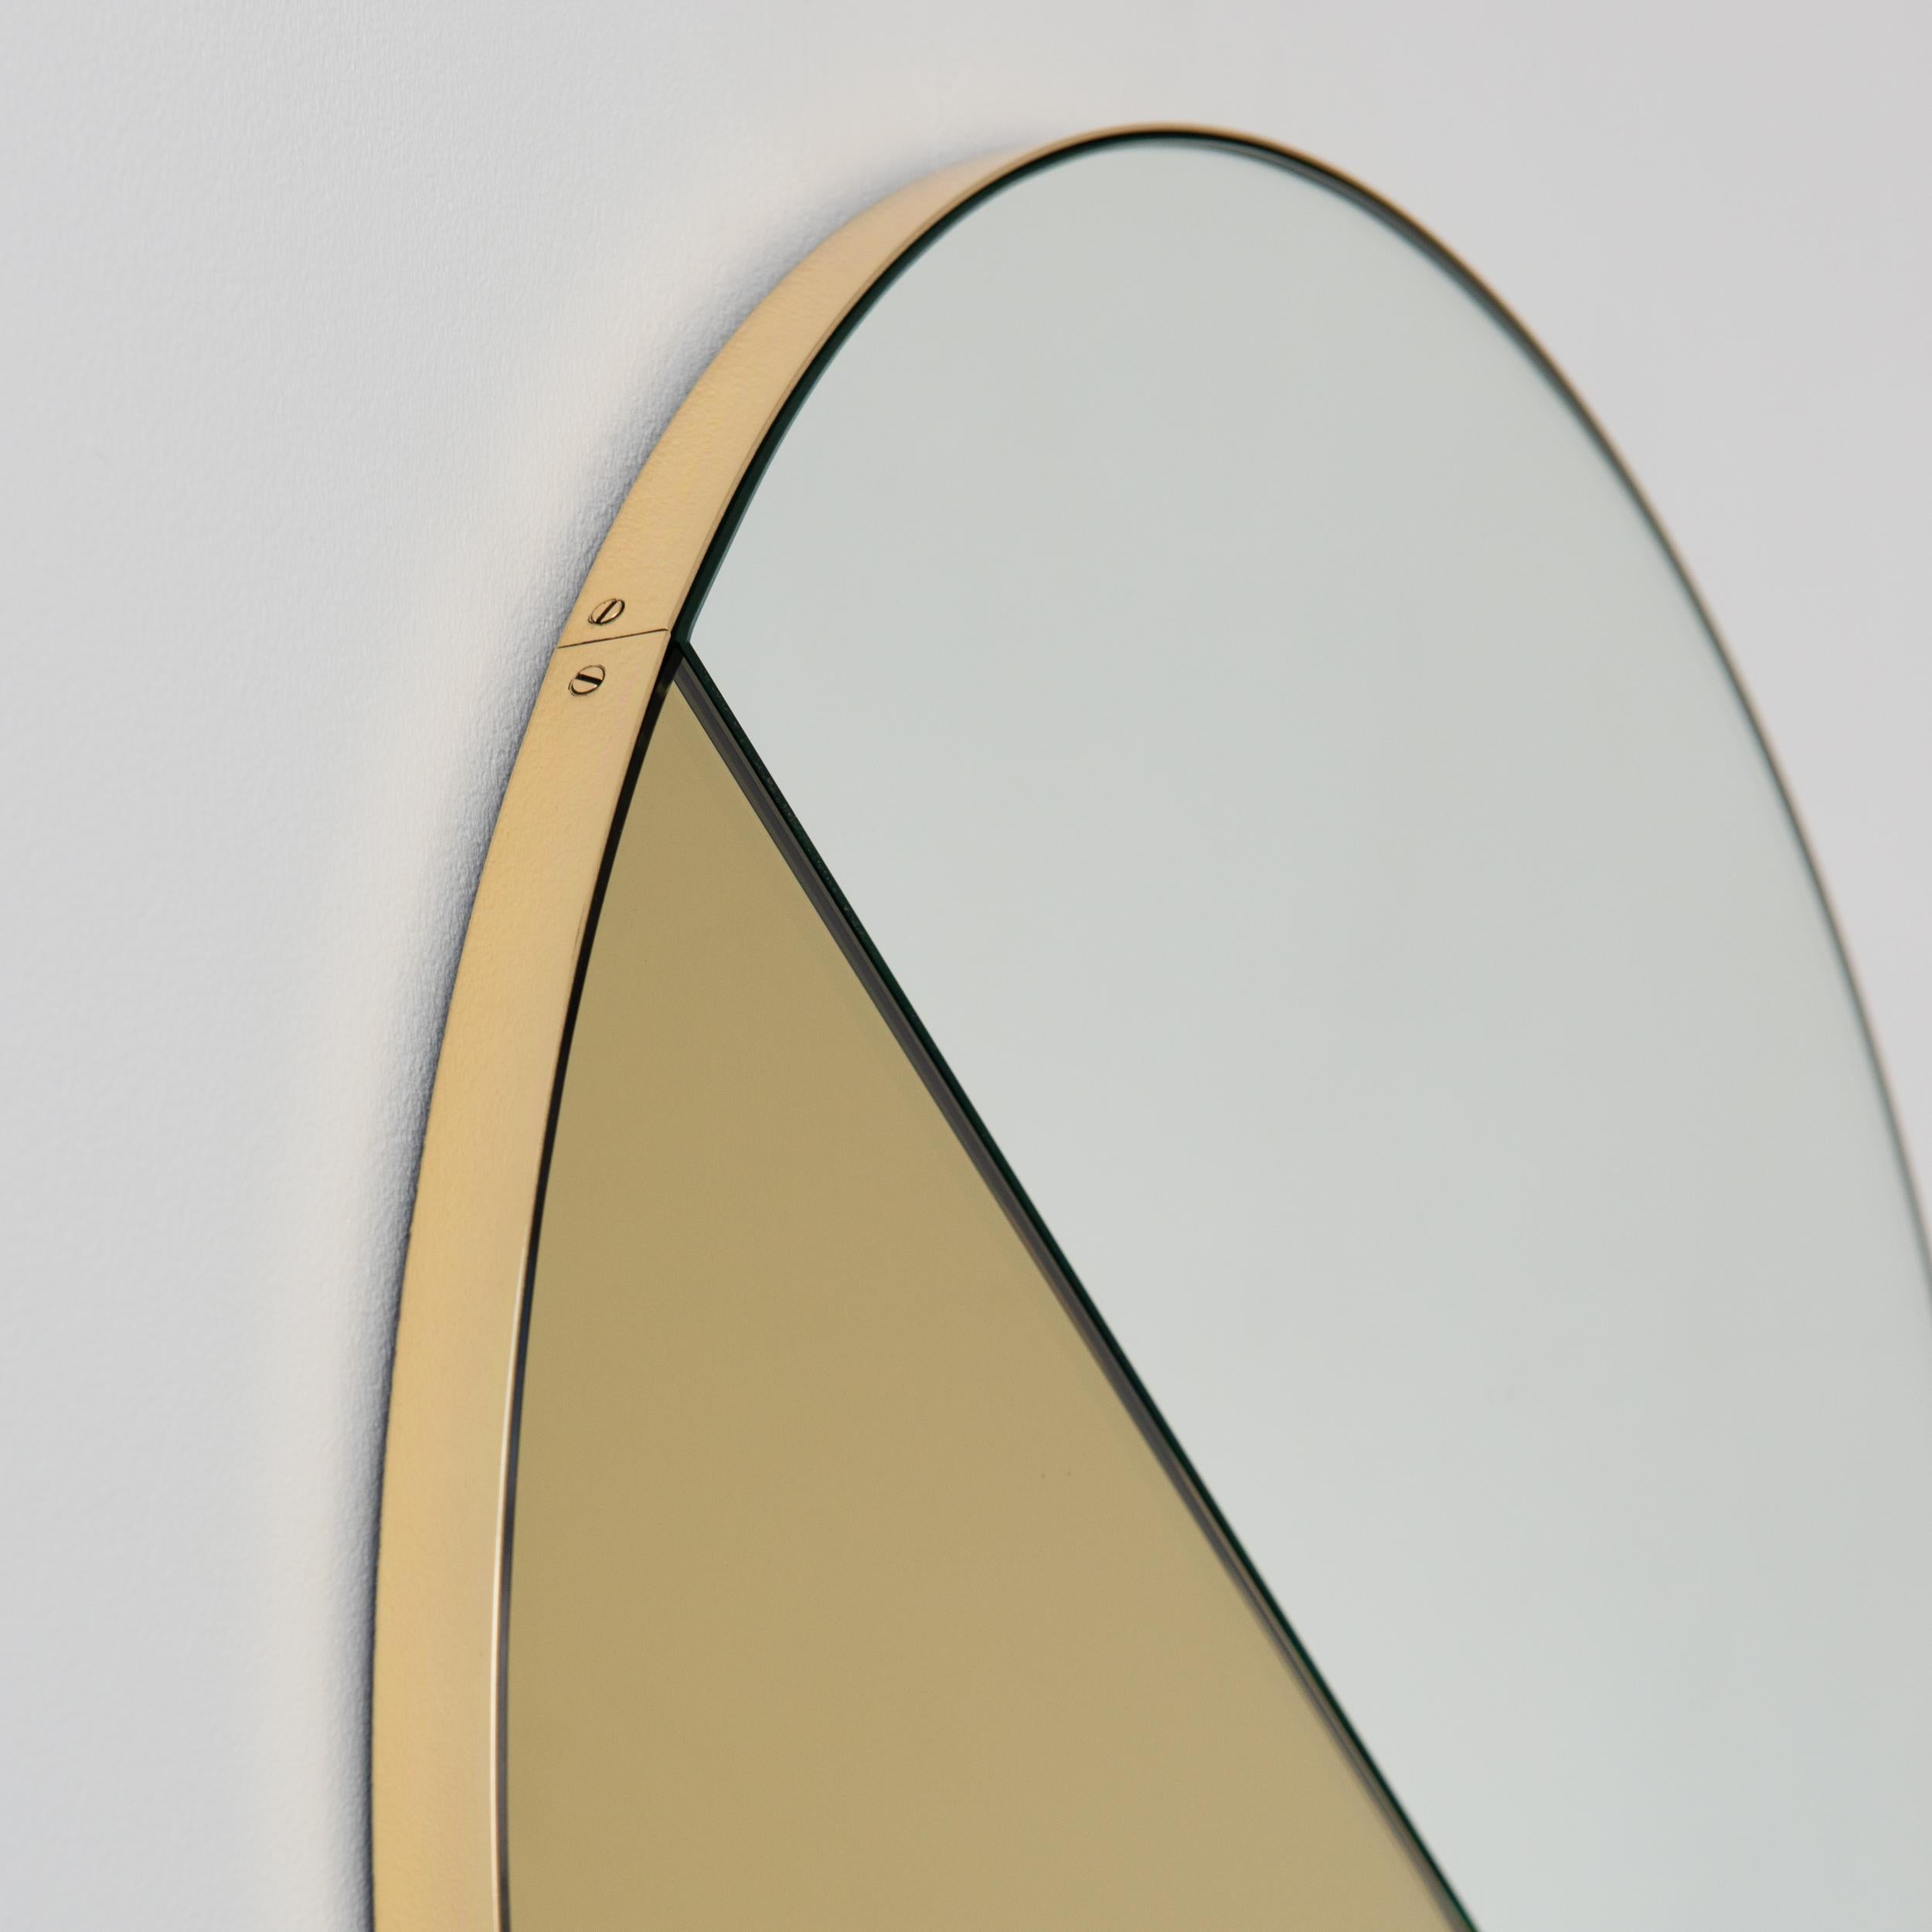 In Stock Orbis Dualis Round Gold Silver Tinted Mirror, Brass Frame, Medium In New Condition For Sale In London, GB